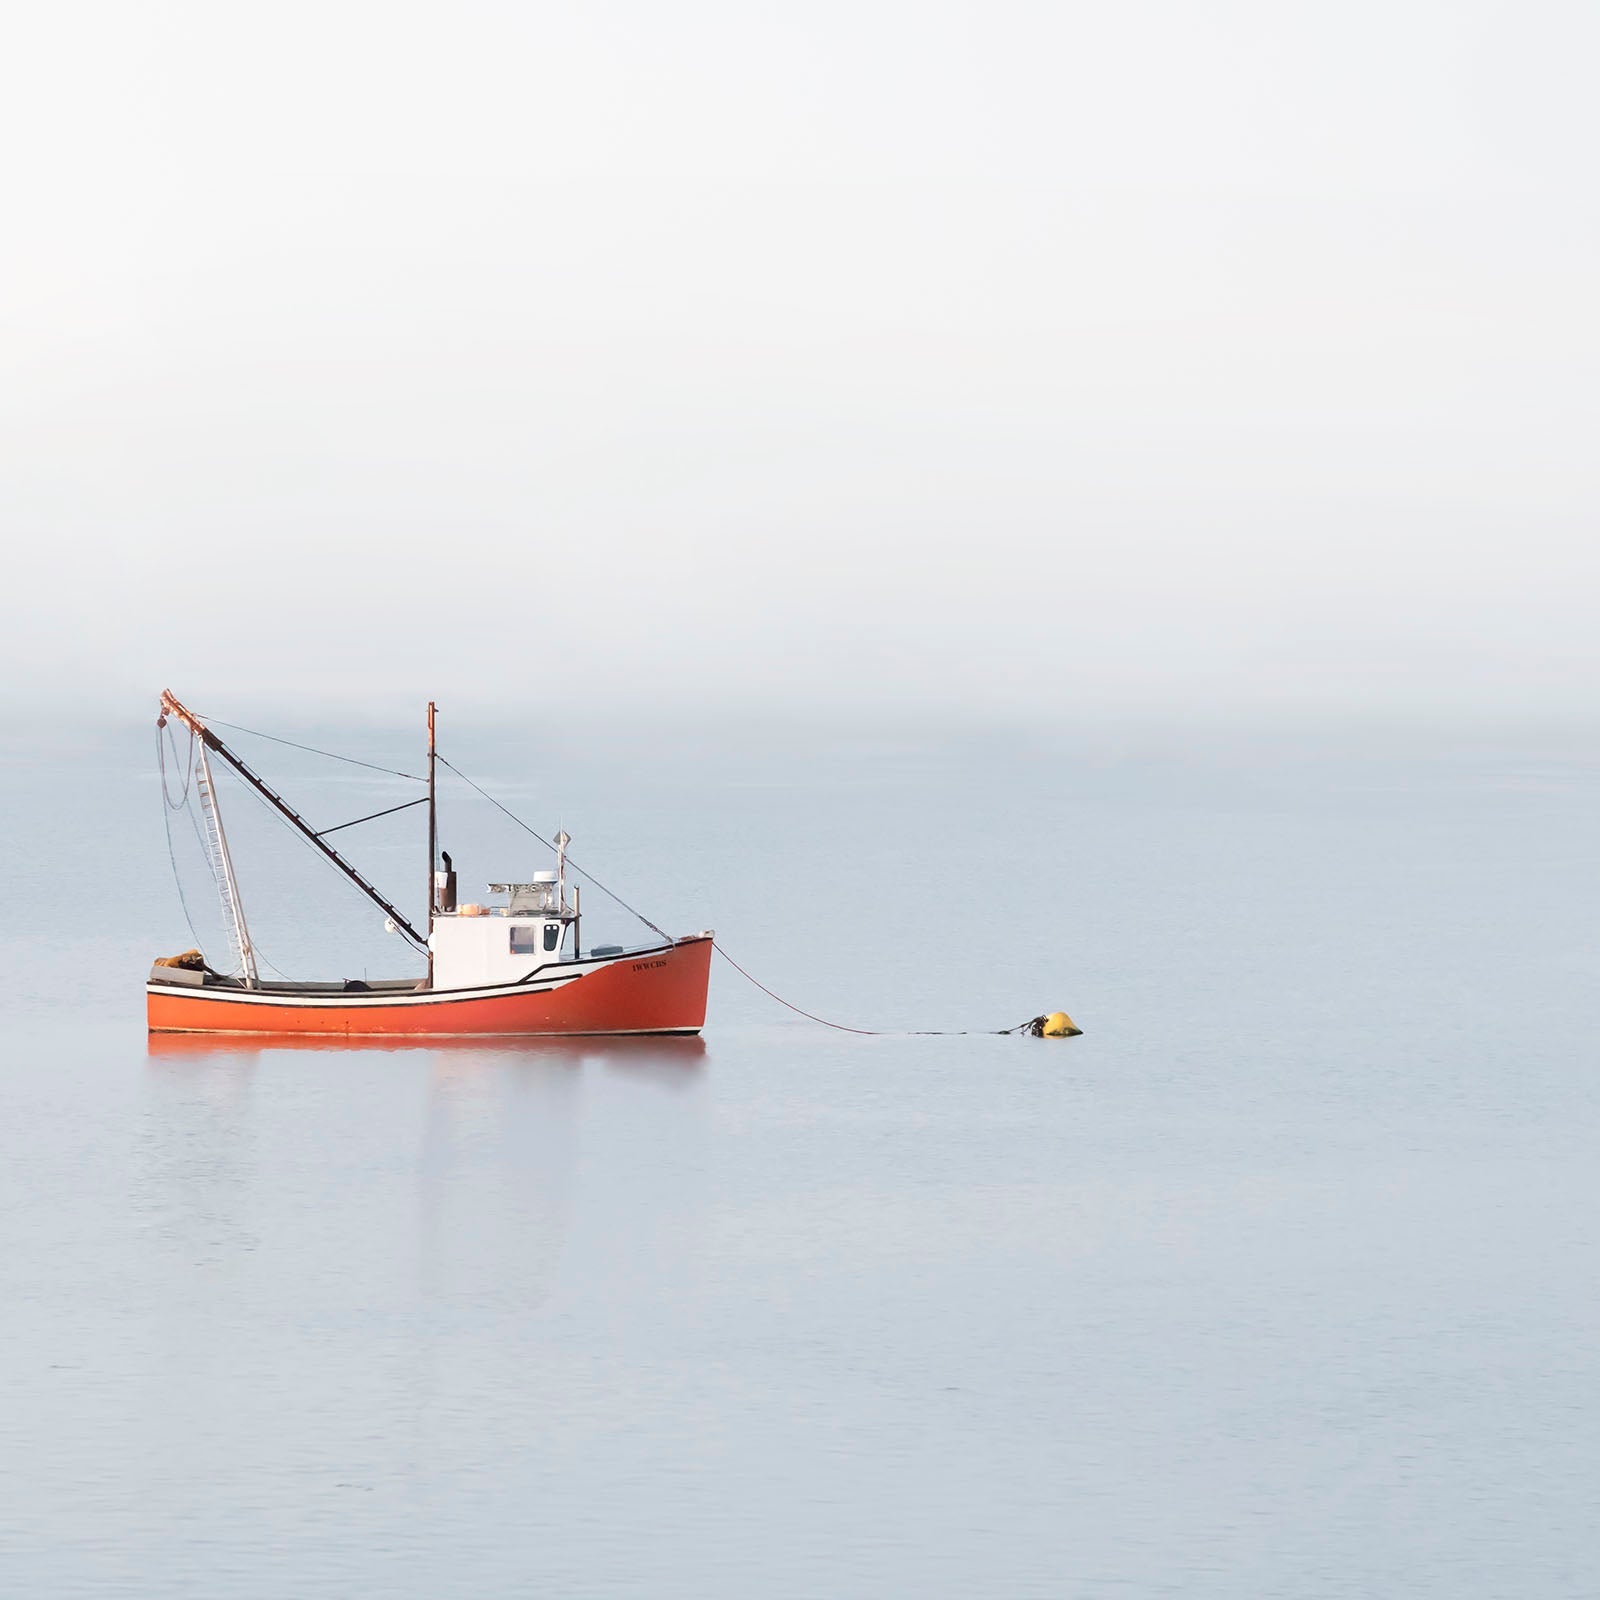 A red boat by itself on the ocean in Lubec, Maine